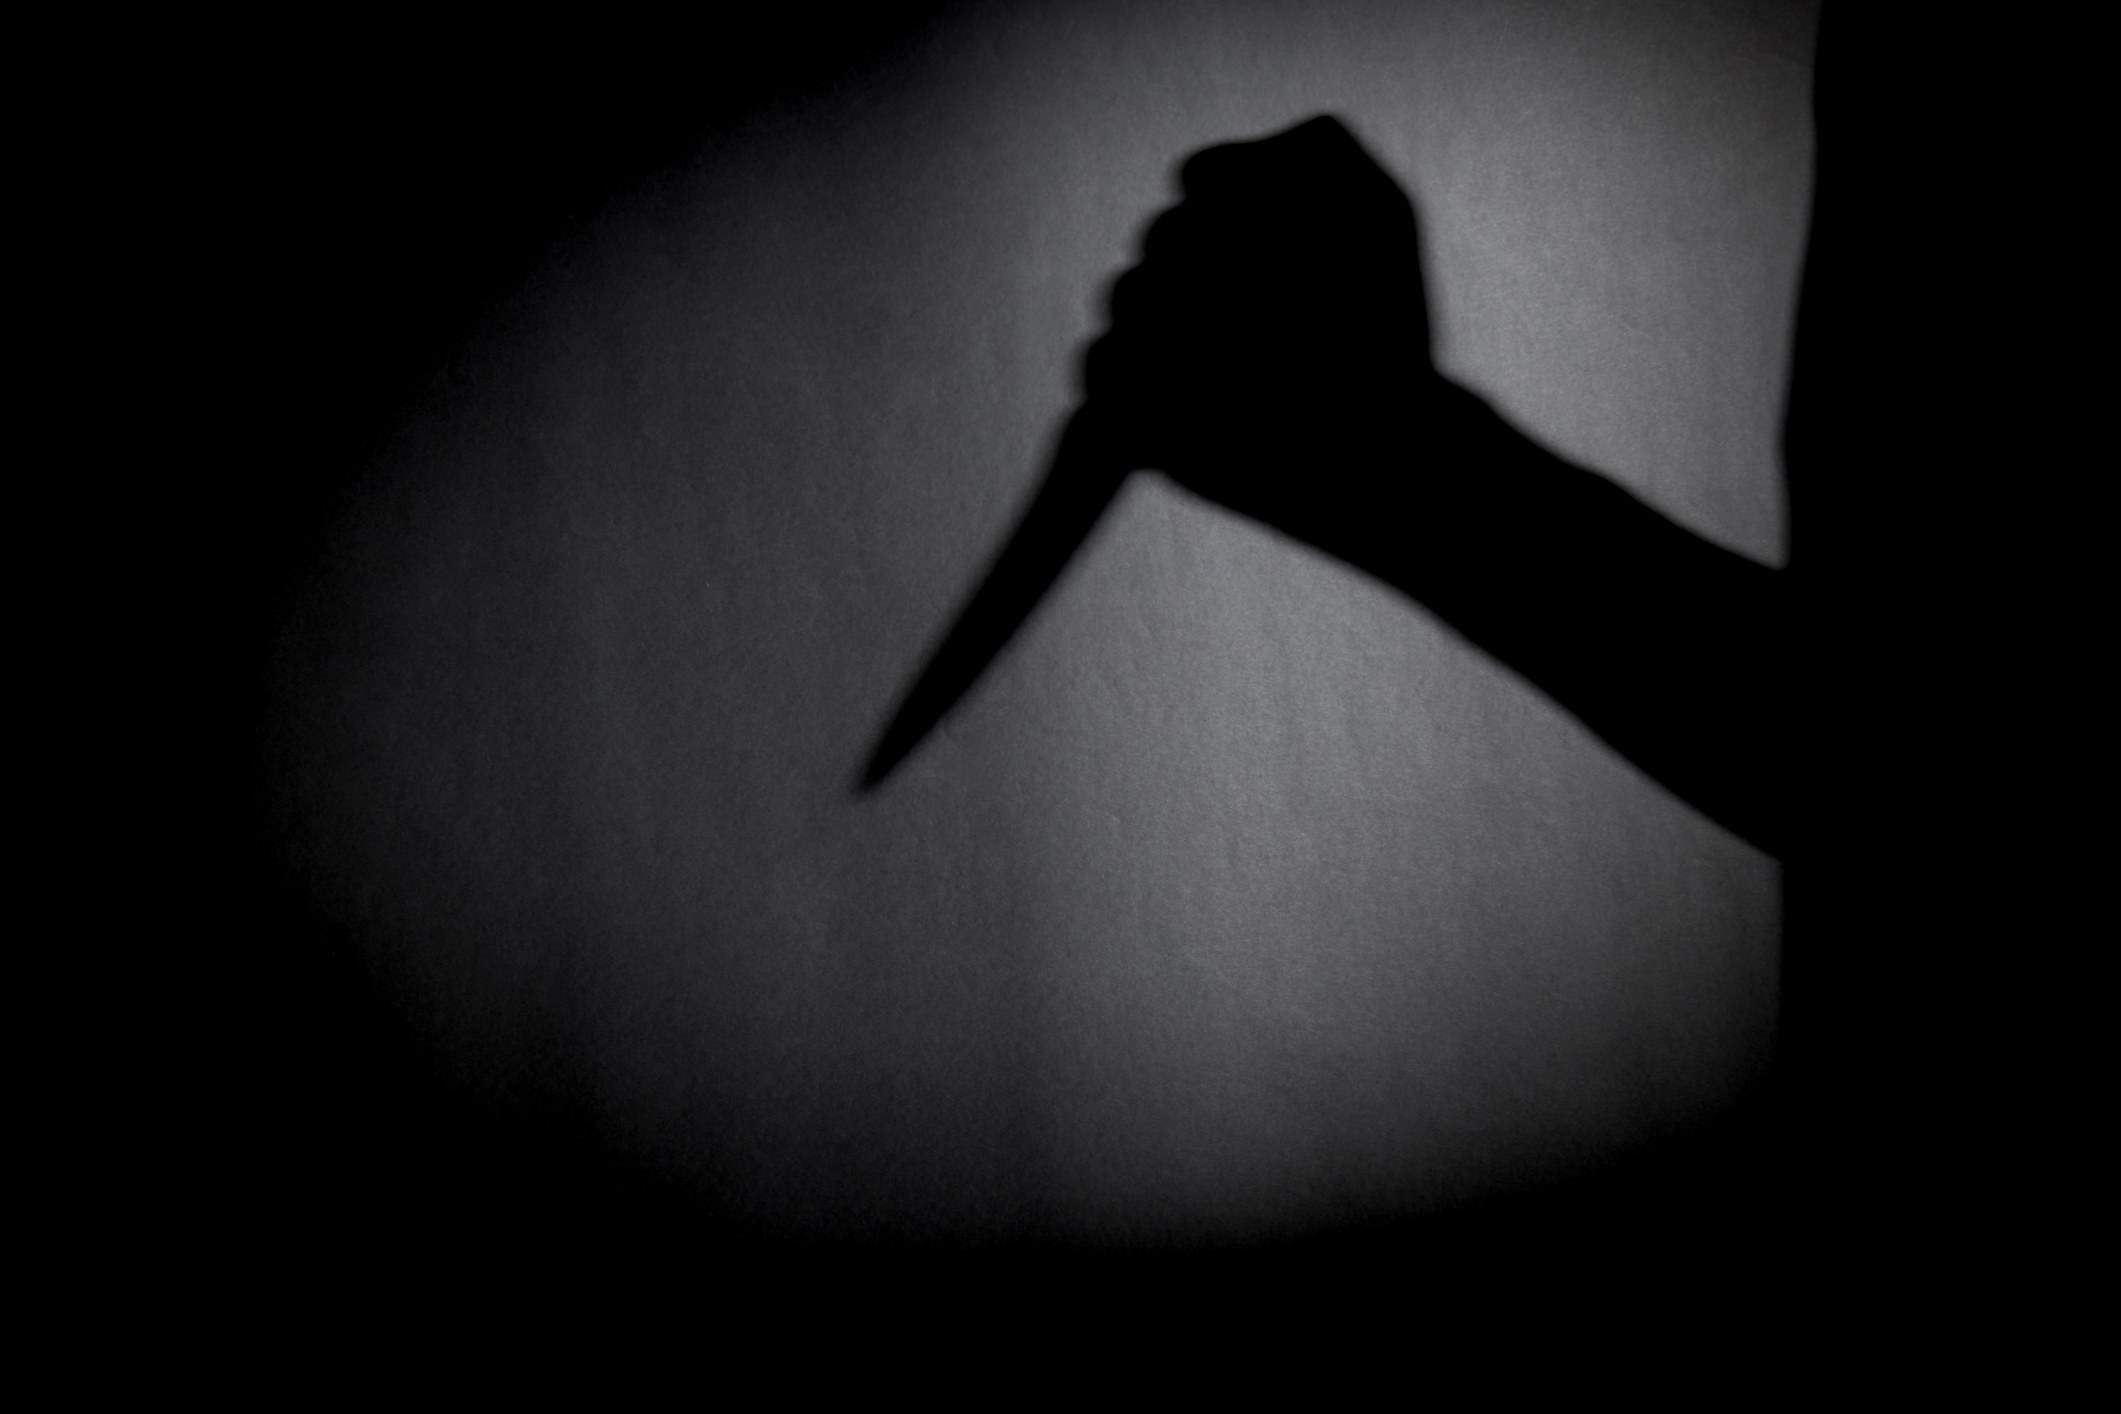 Shadow of someone holding a kitchen knife